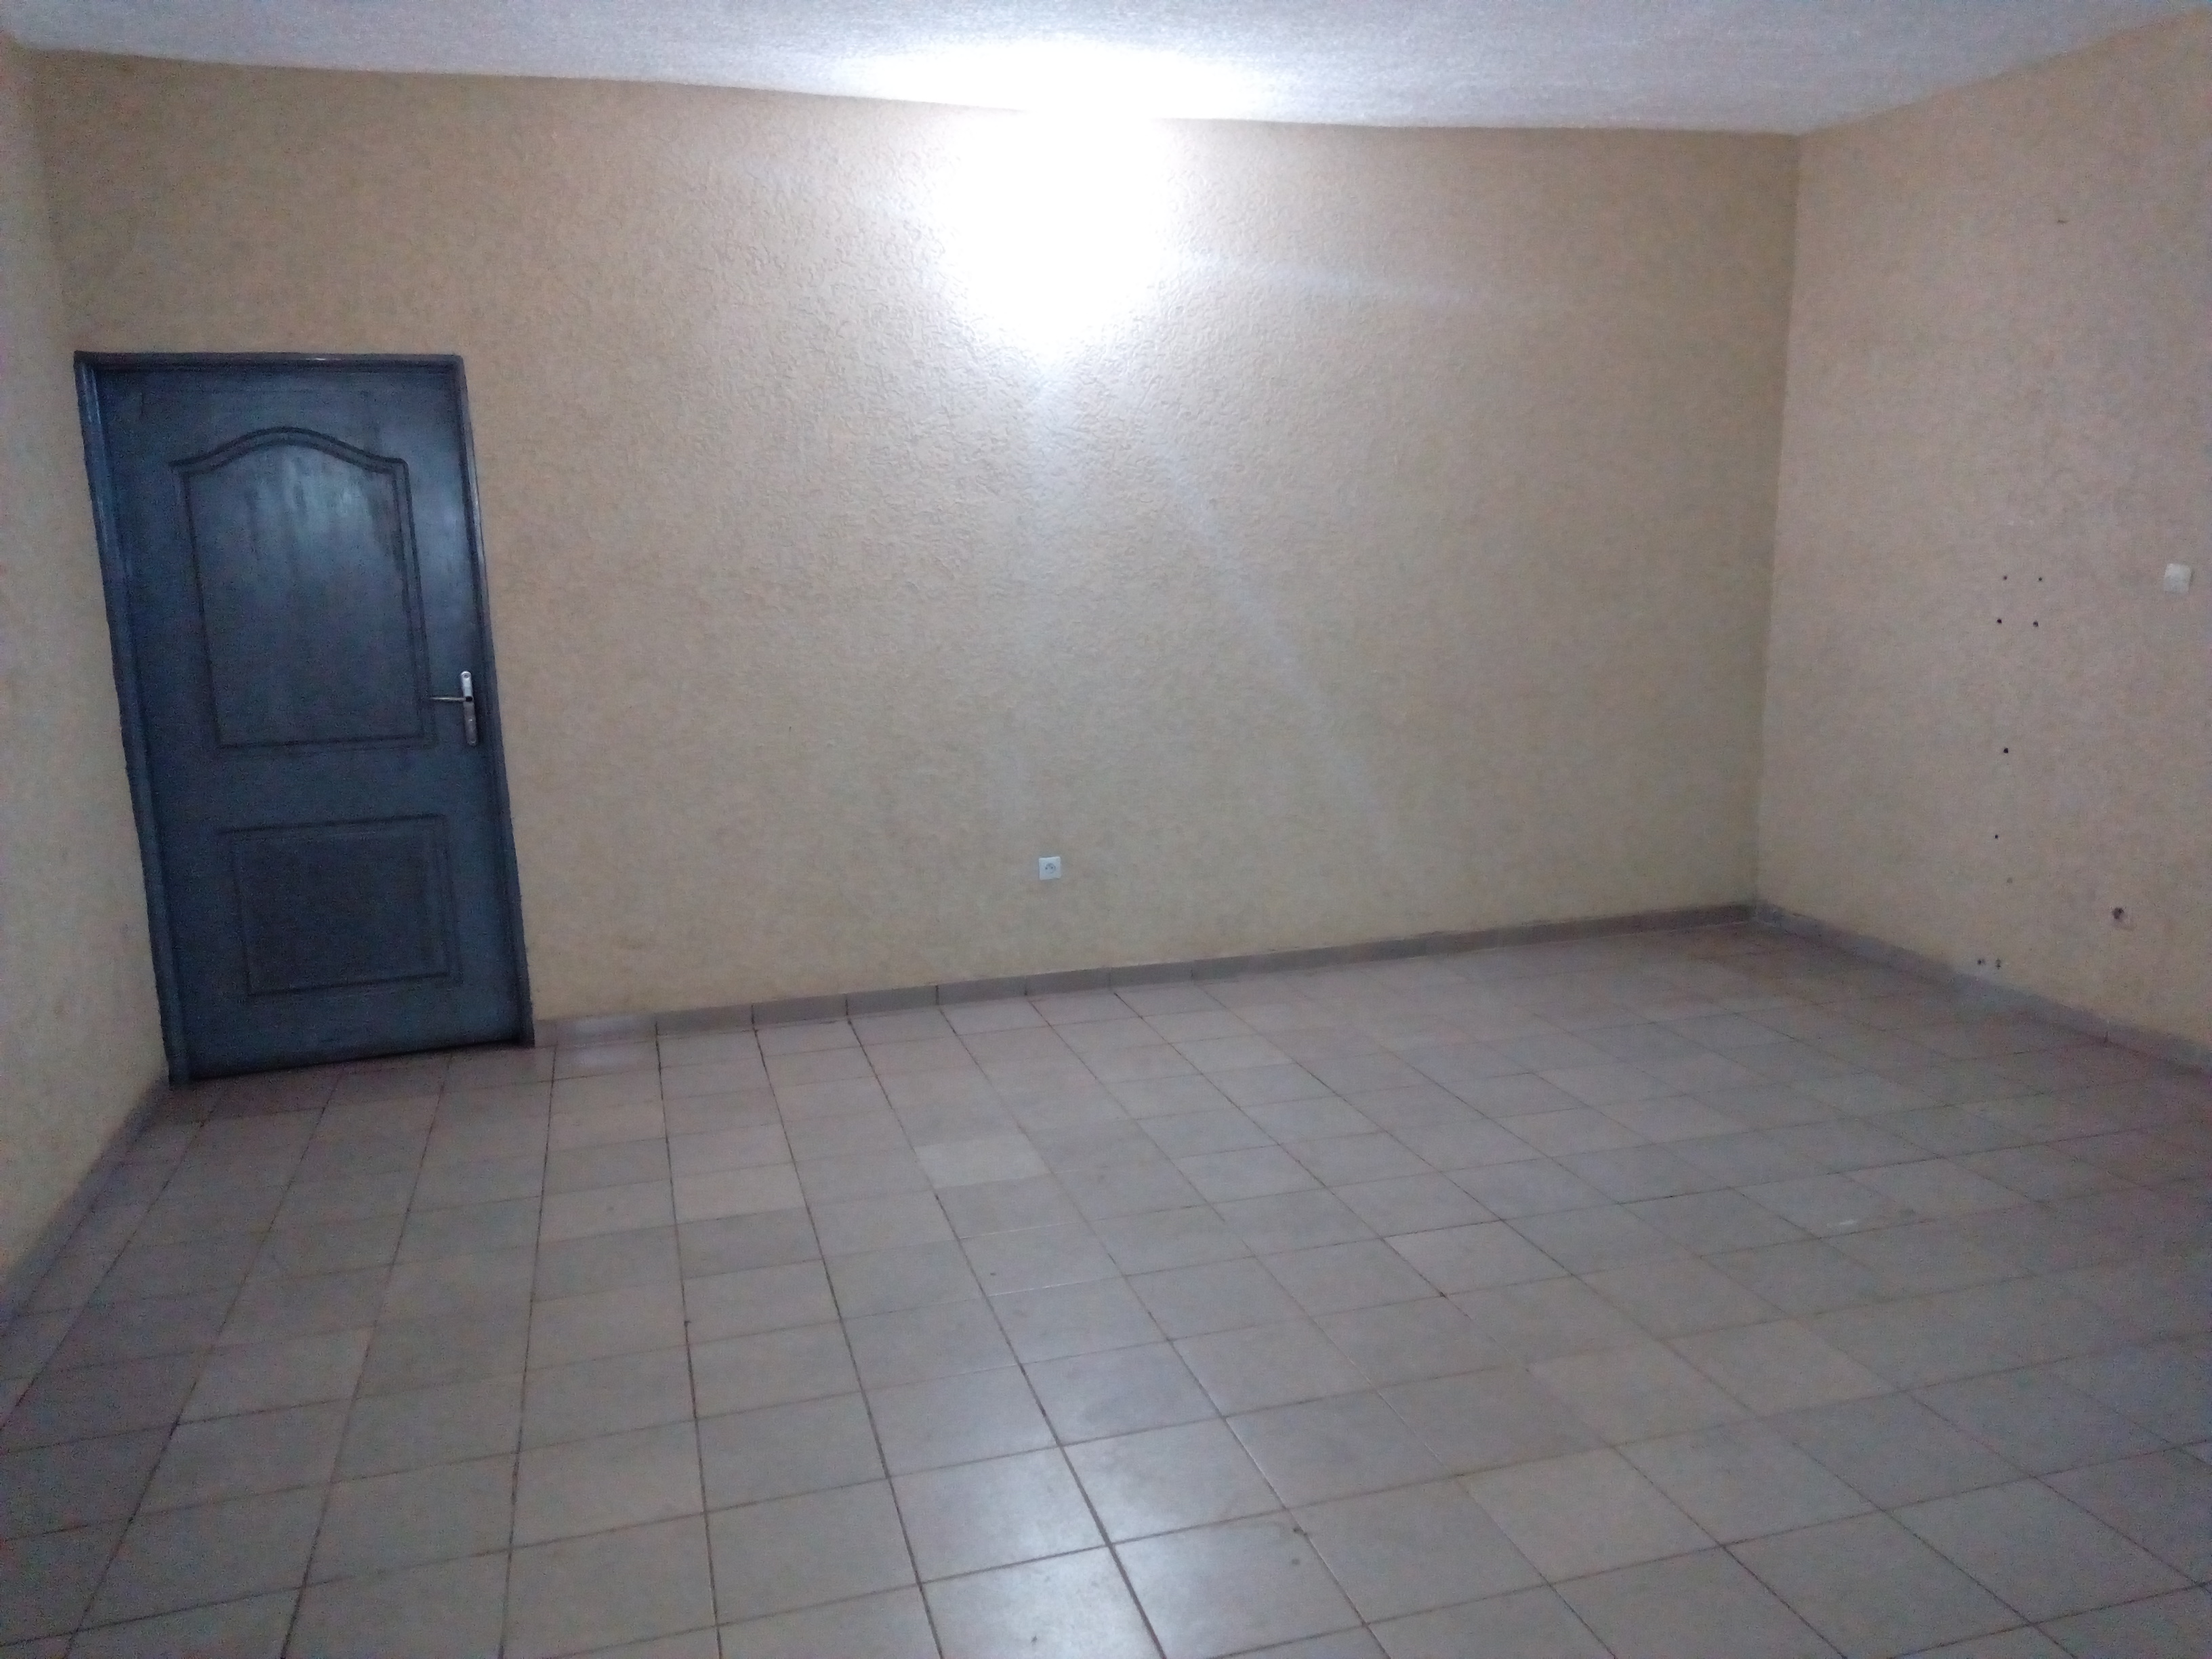 N° 4112 :
                            Appartement à louer , Avedji, Lome, Togo : 120 000 XOF/mois